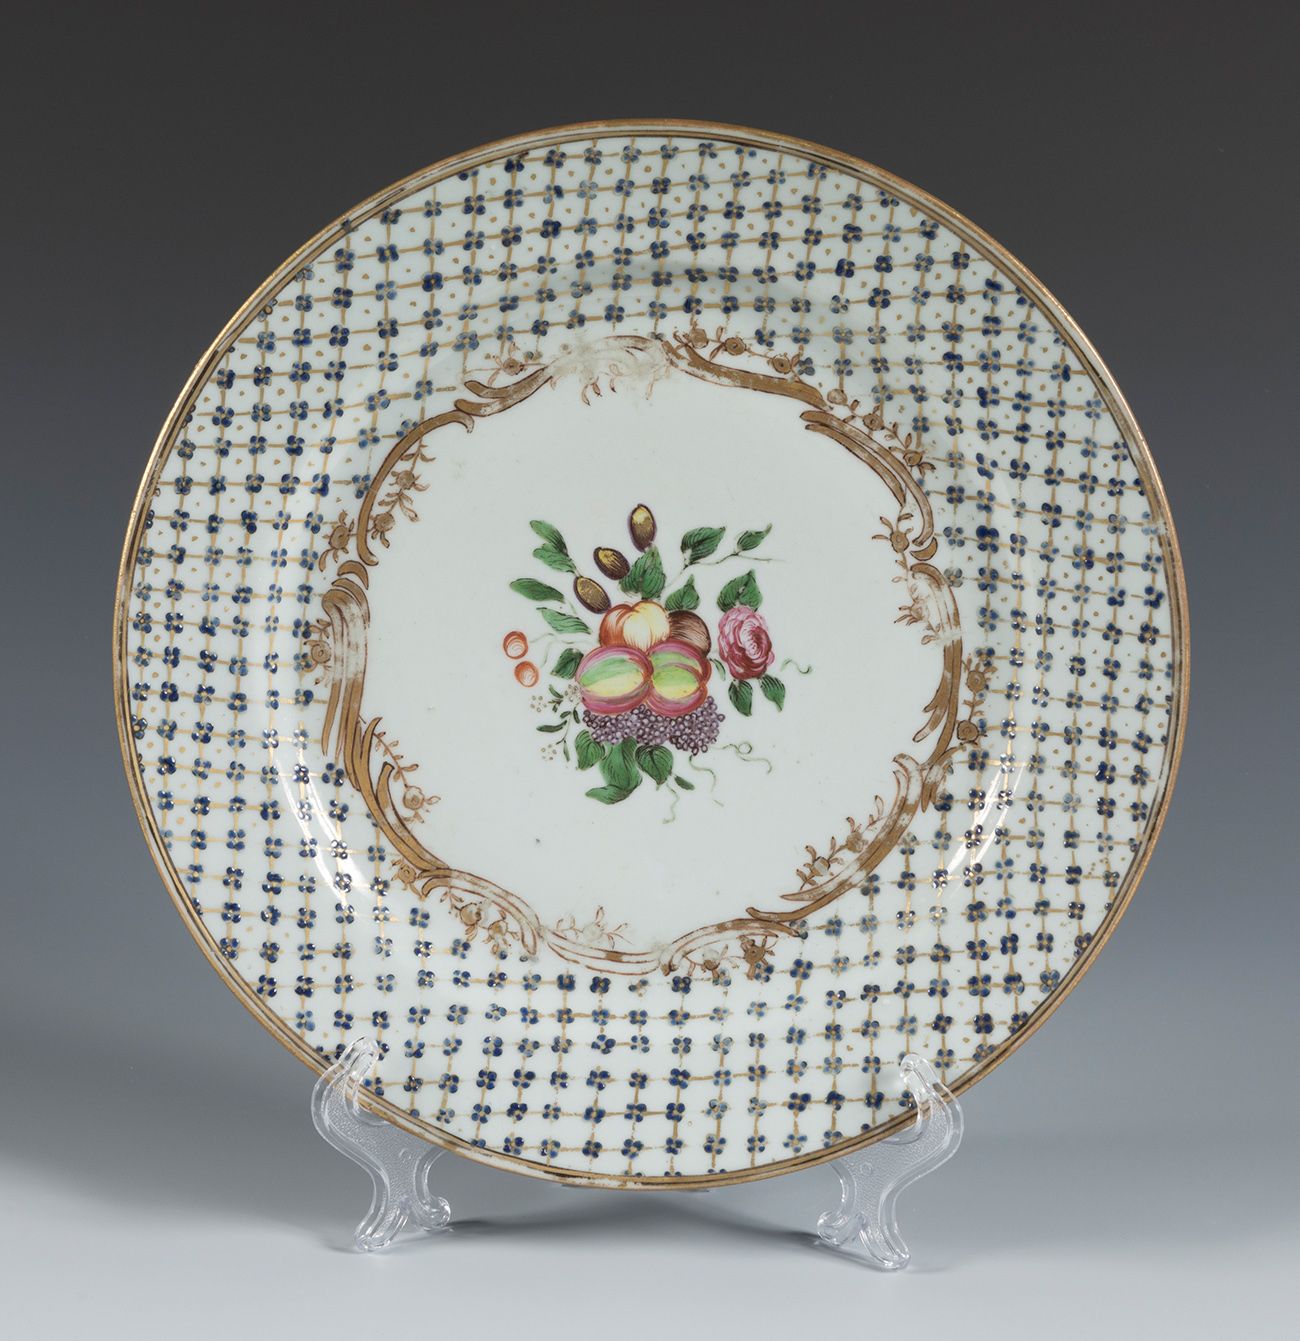 Null Qianlong Dish, Company of the Indies, after the Louis XV taste, ca. 1740.
E&hellip;